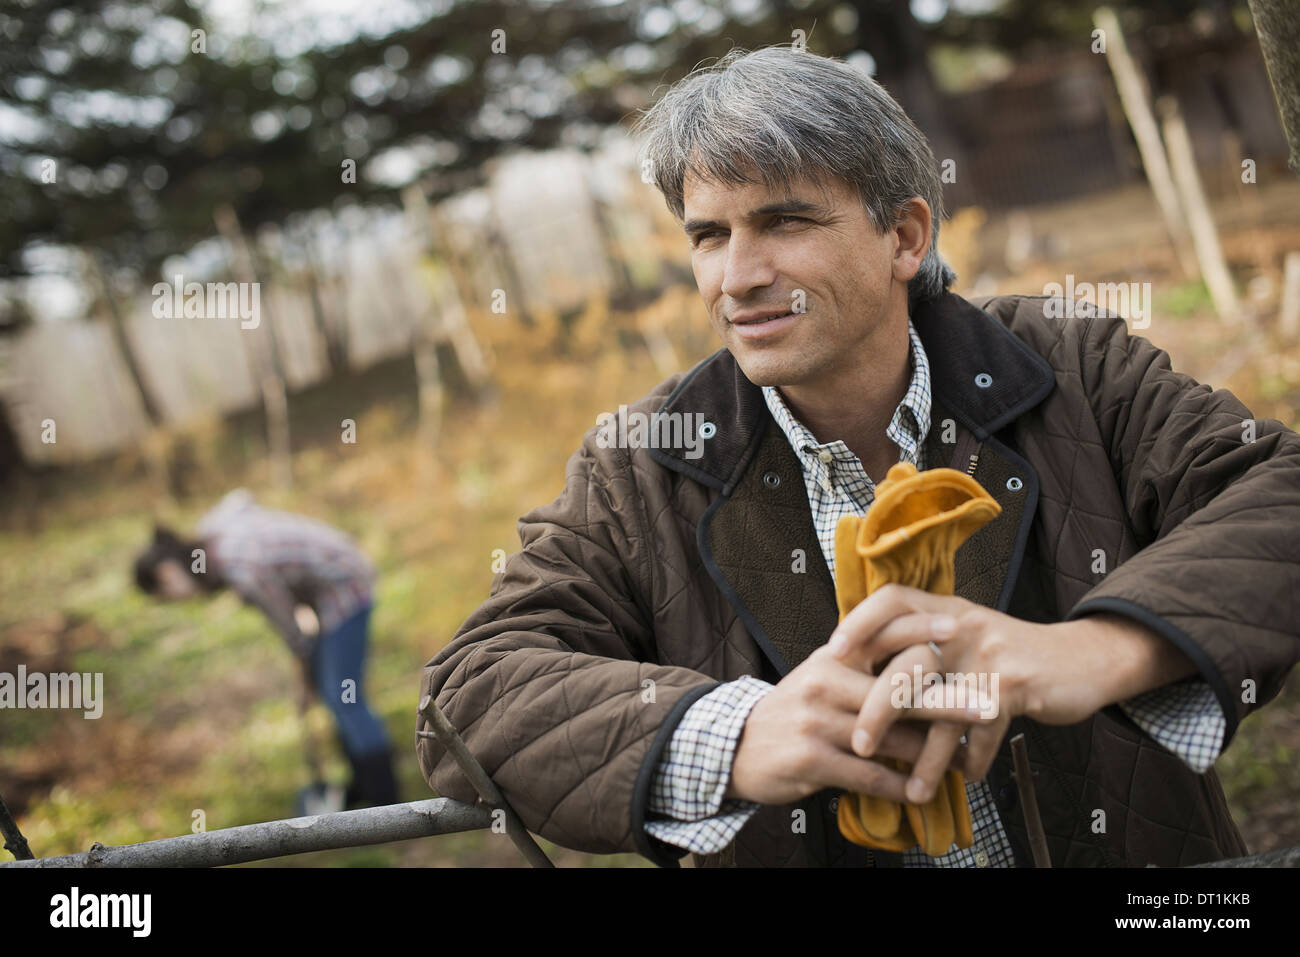 A man in a brown jacket holding leather work gloves on an organic farm A person digging in the ground with a spade Stock Photo